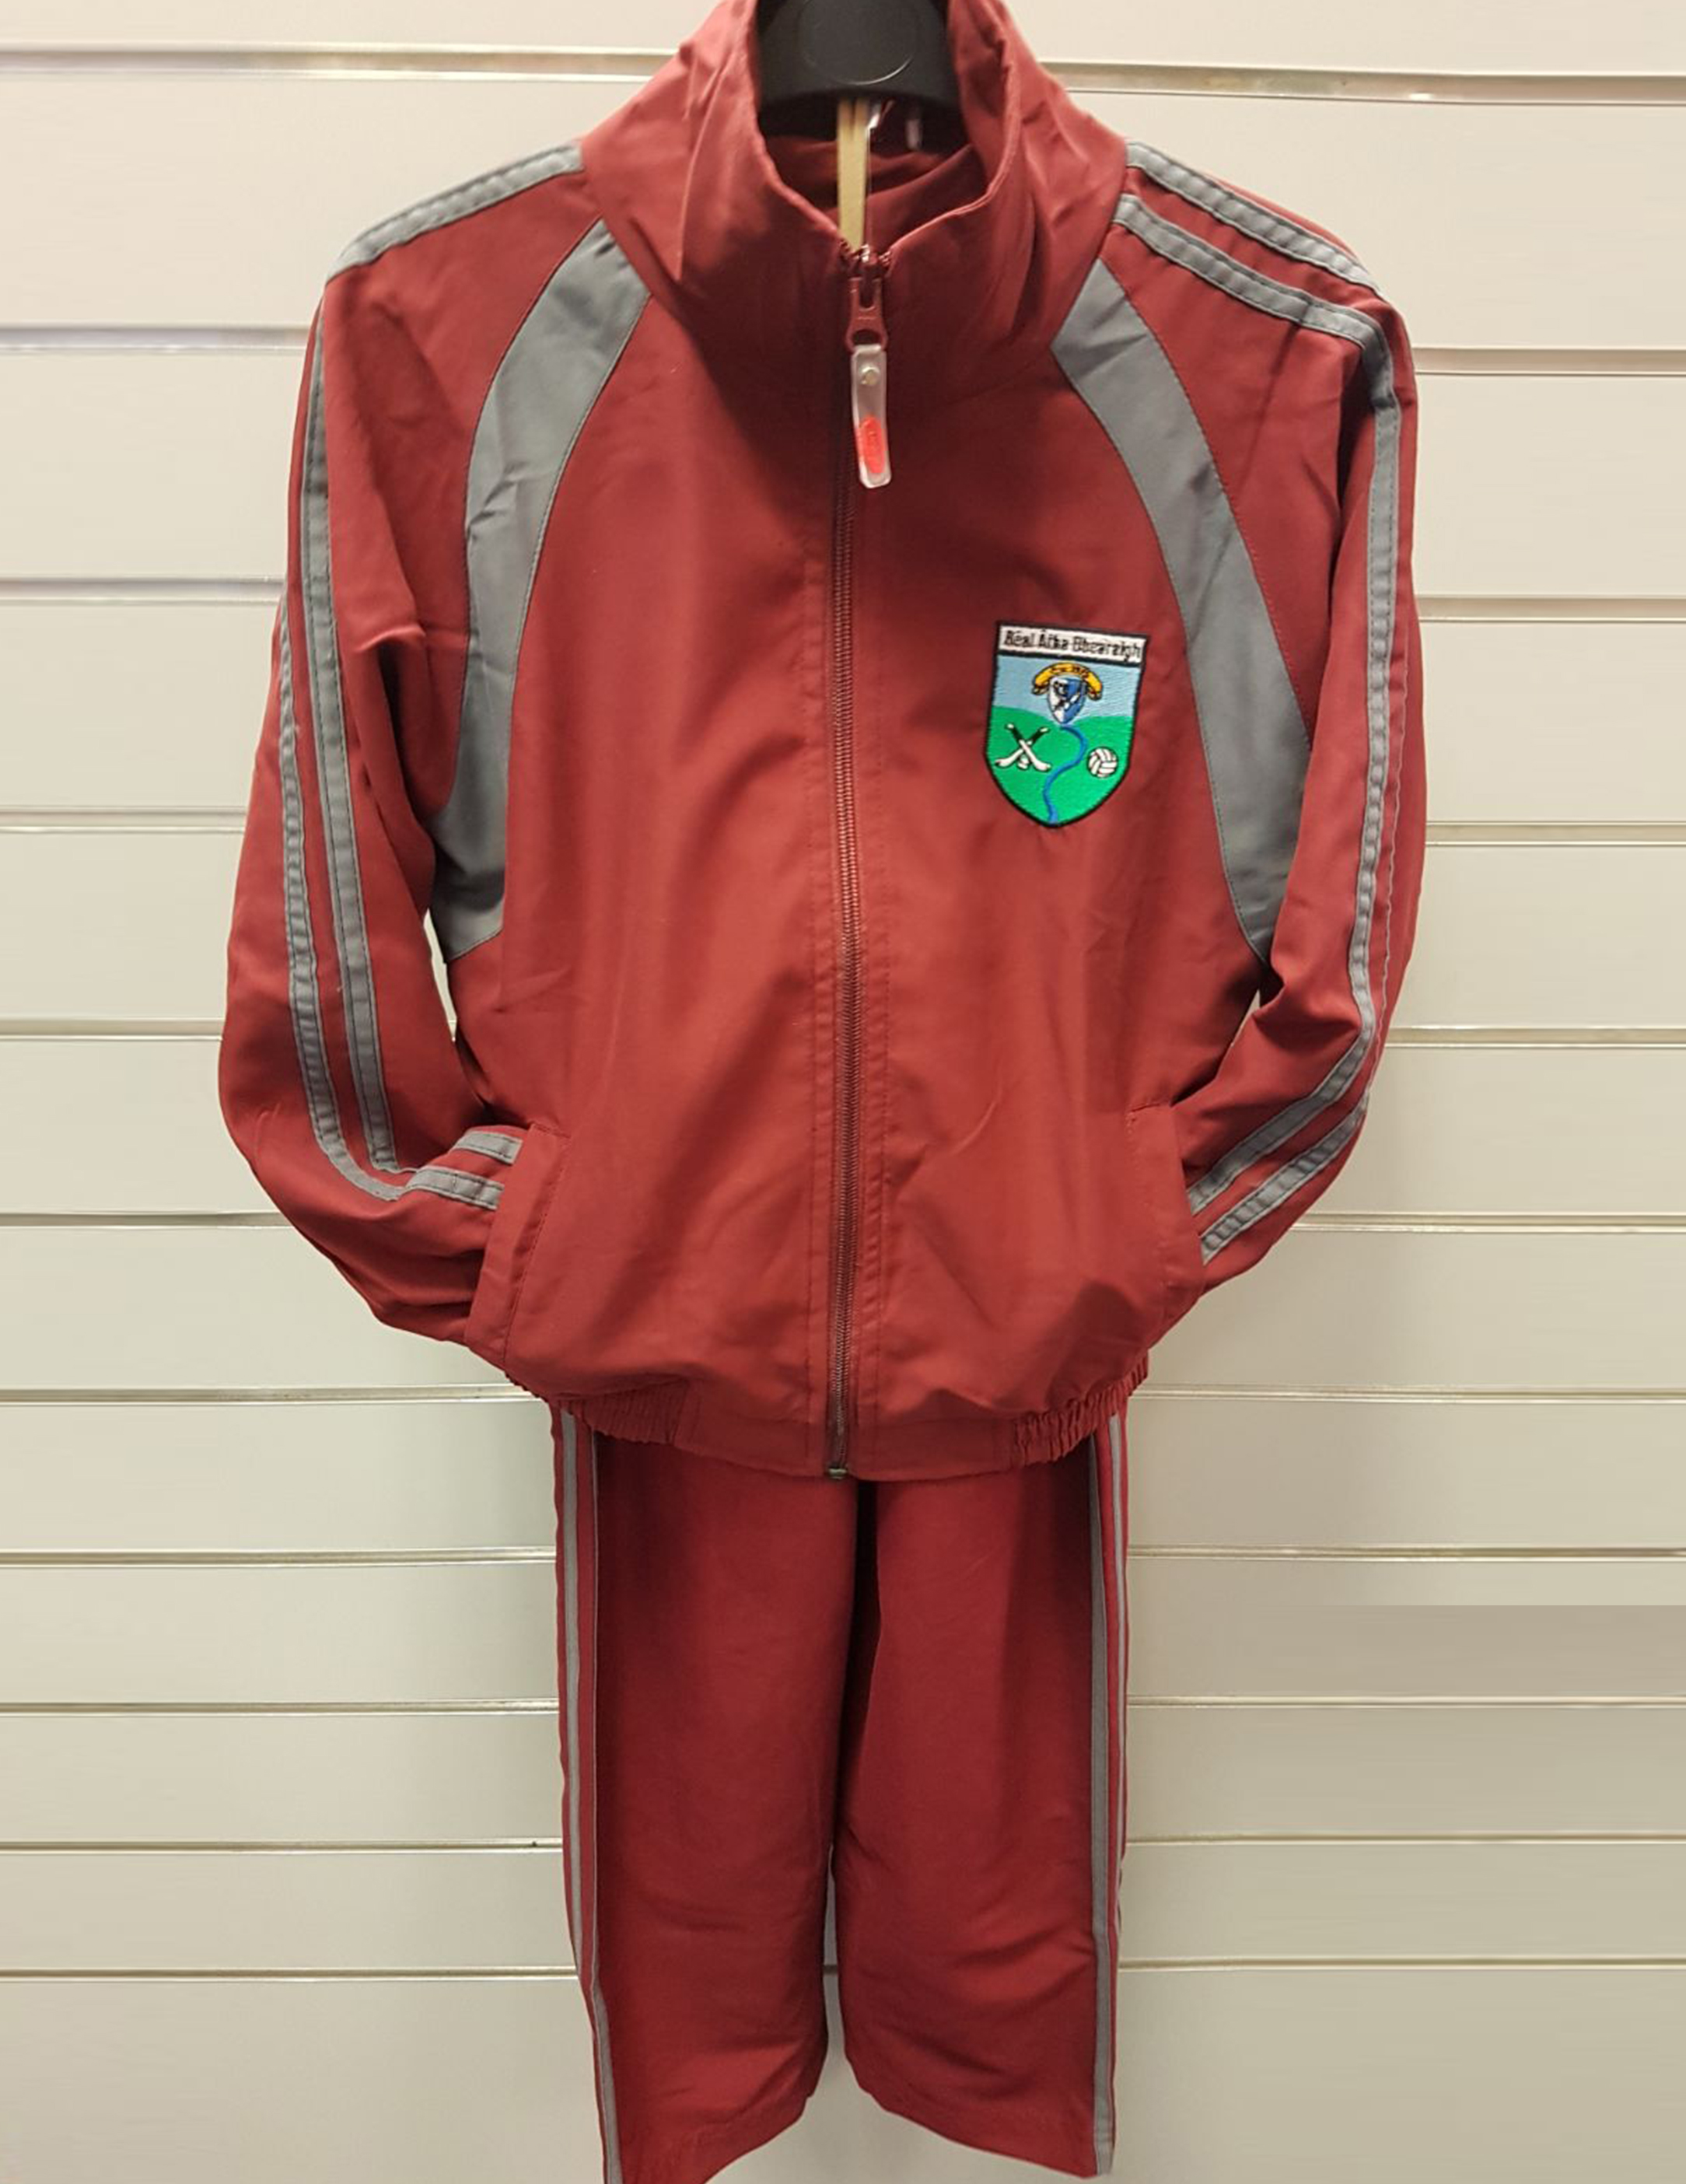 Ballyvary Tracksuit (BVT) - The Schoolwear CentreThe Schoolwear Centre